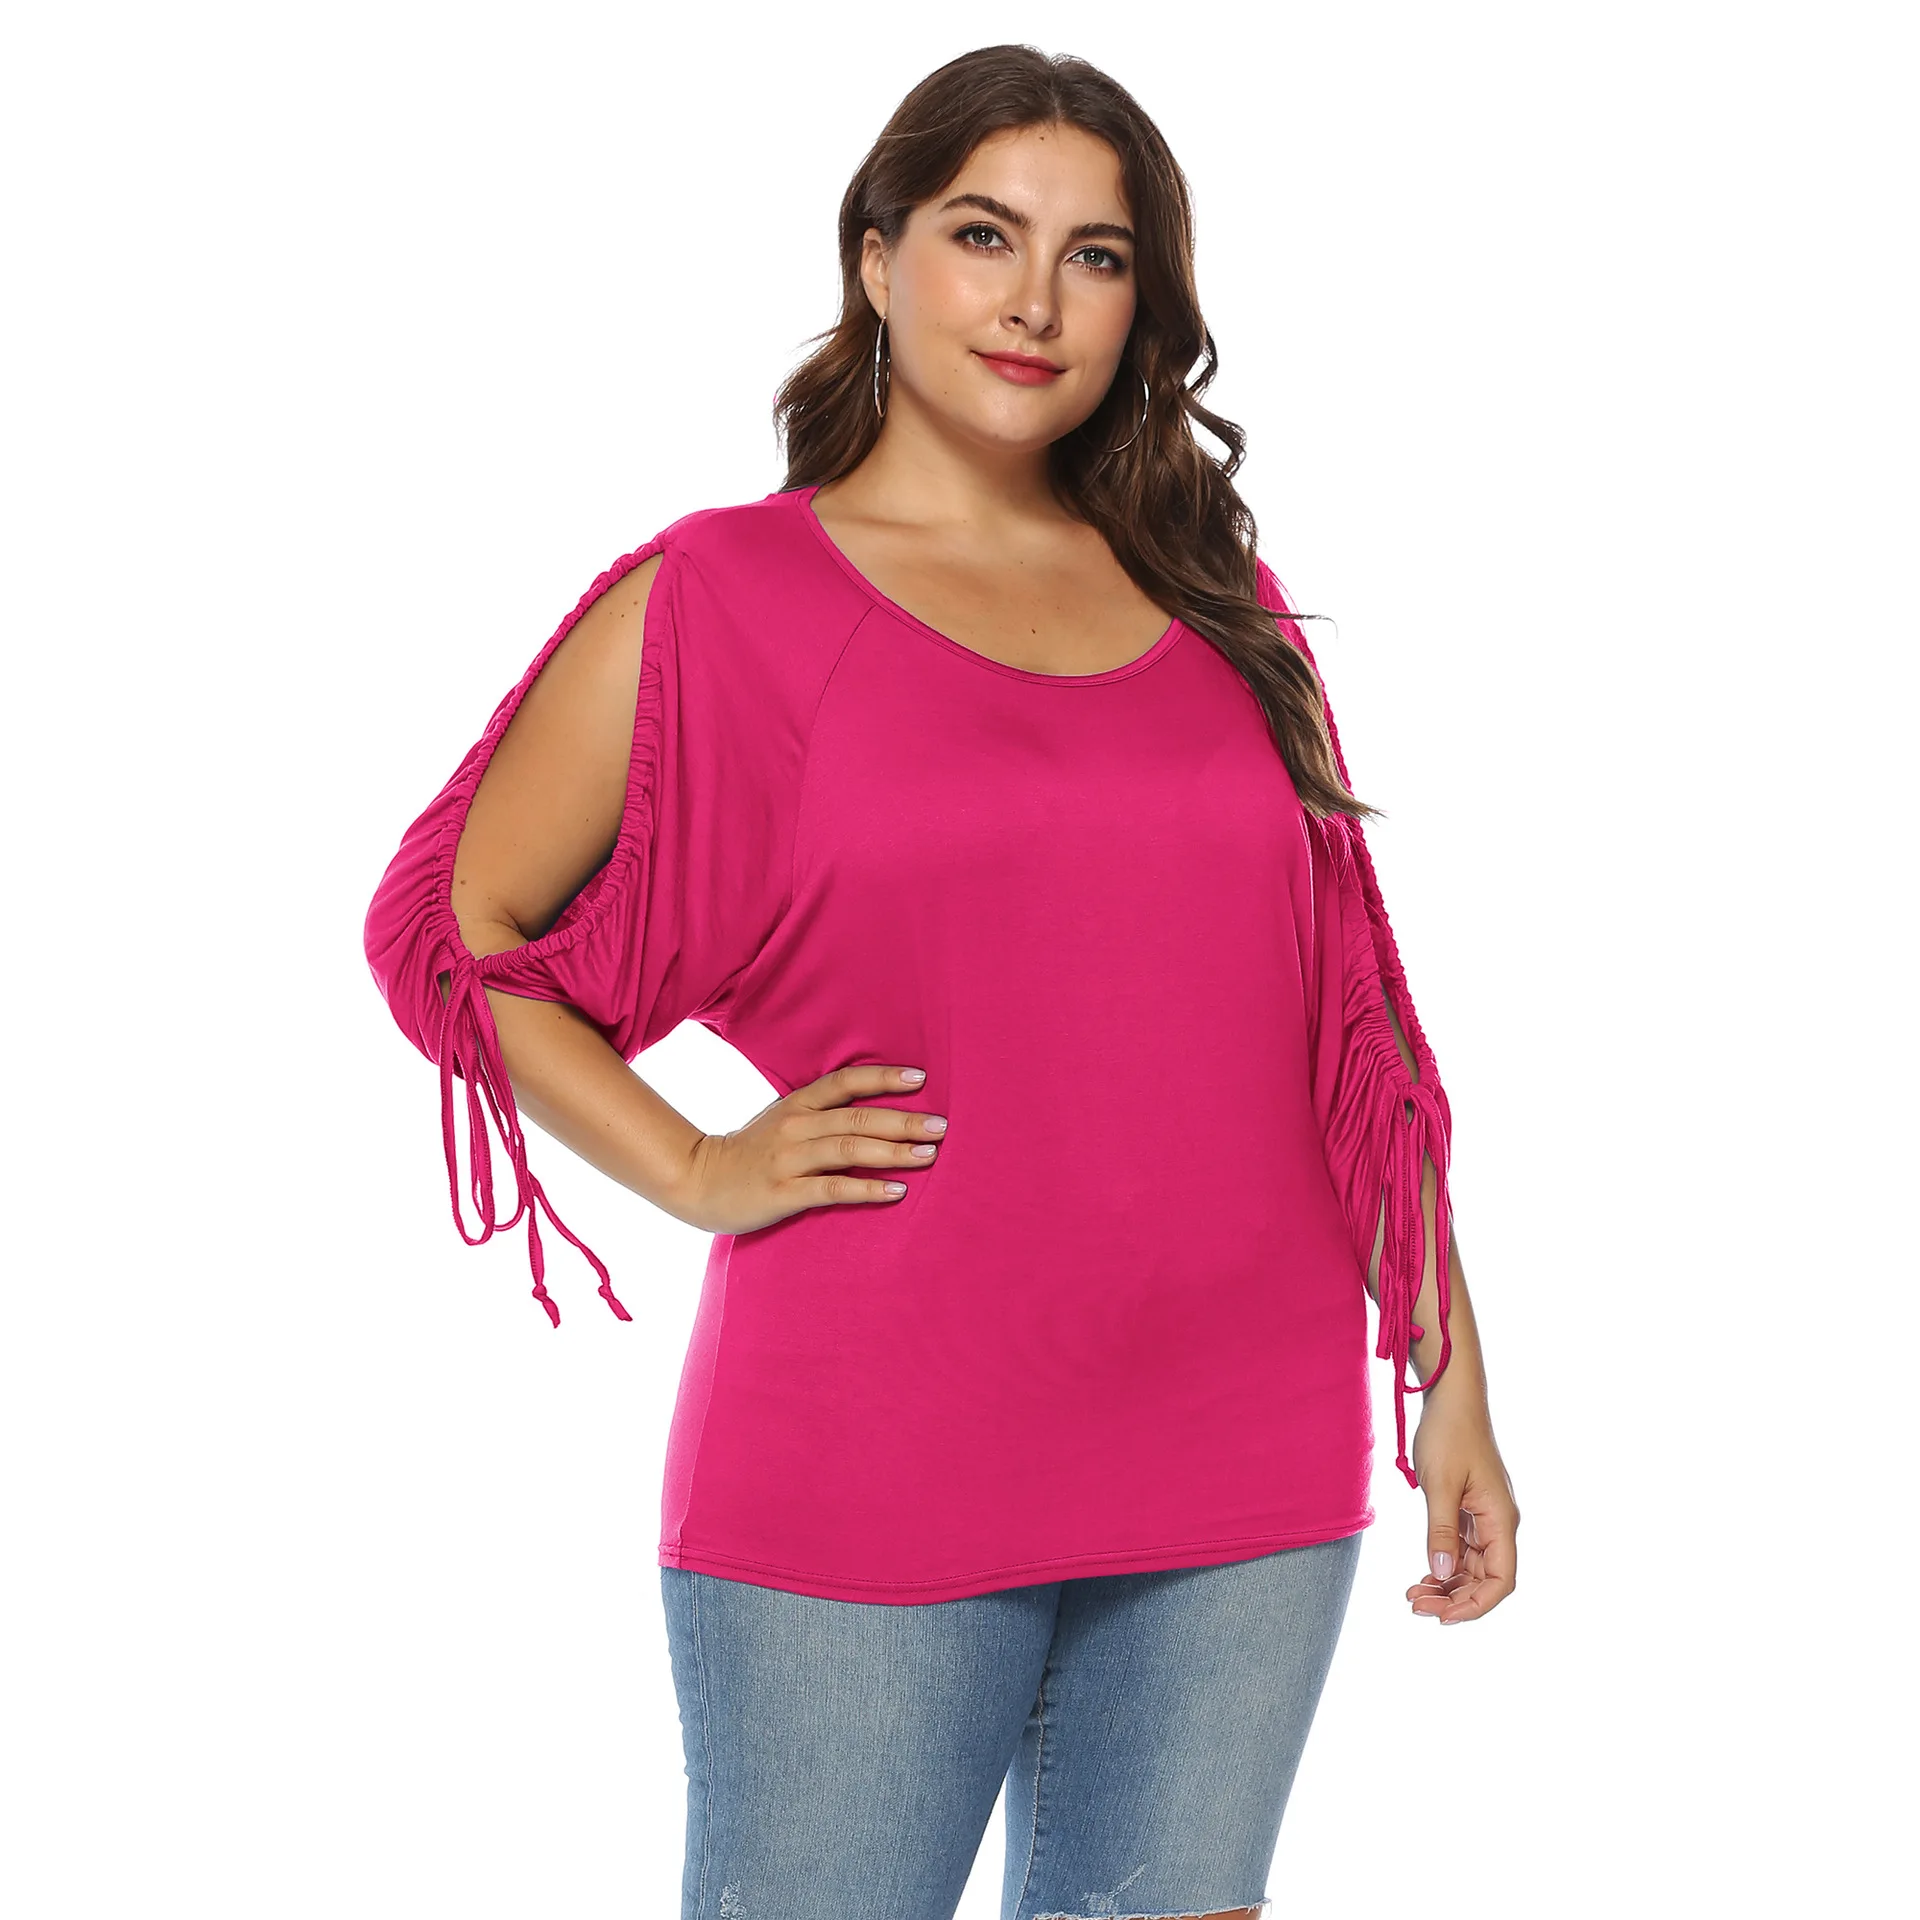 Ladies Tops Images Plus Size Short Sleeve Tops For Fat Women Summer ...